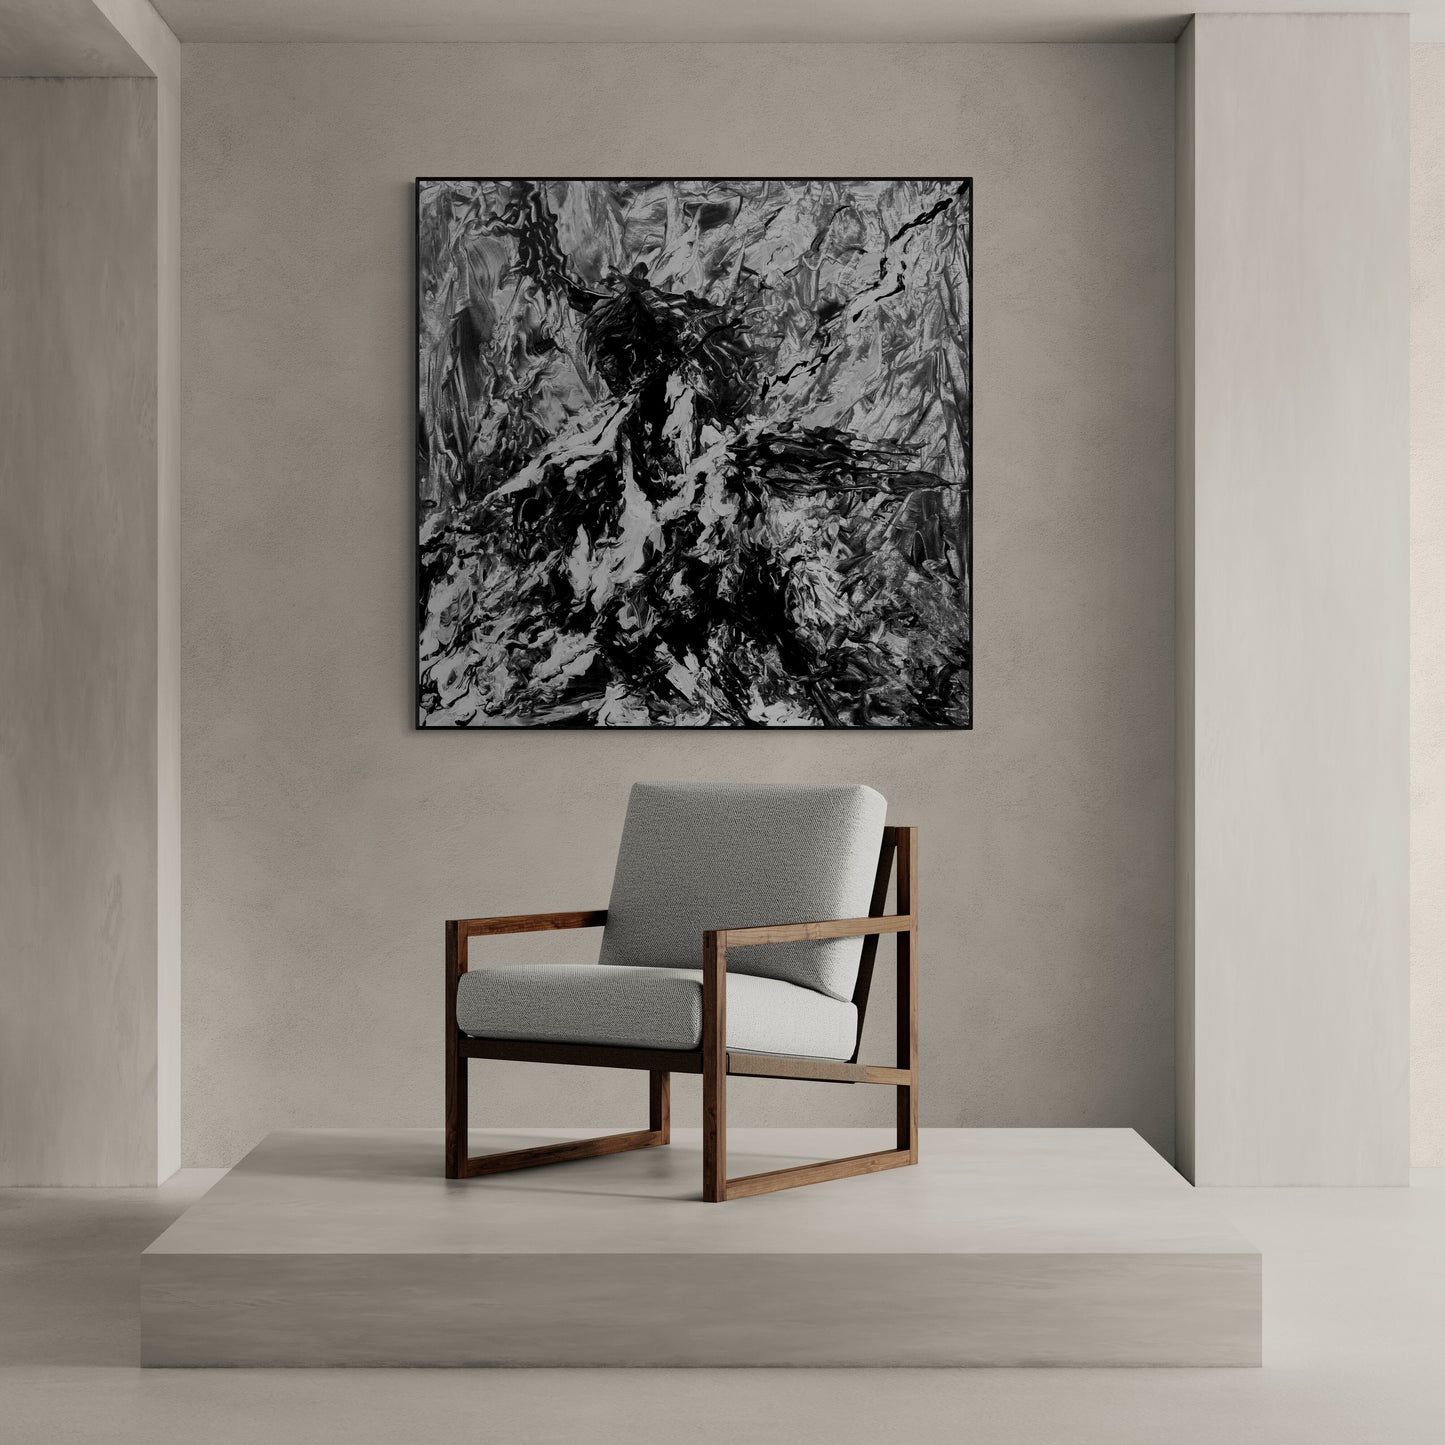 CANVAS PRINT abstract horse in painting blck and white with artistic finish wall art Scandinavian style